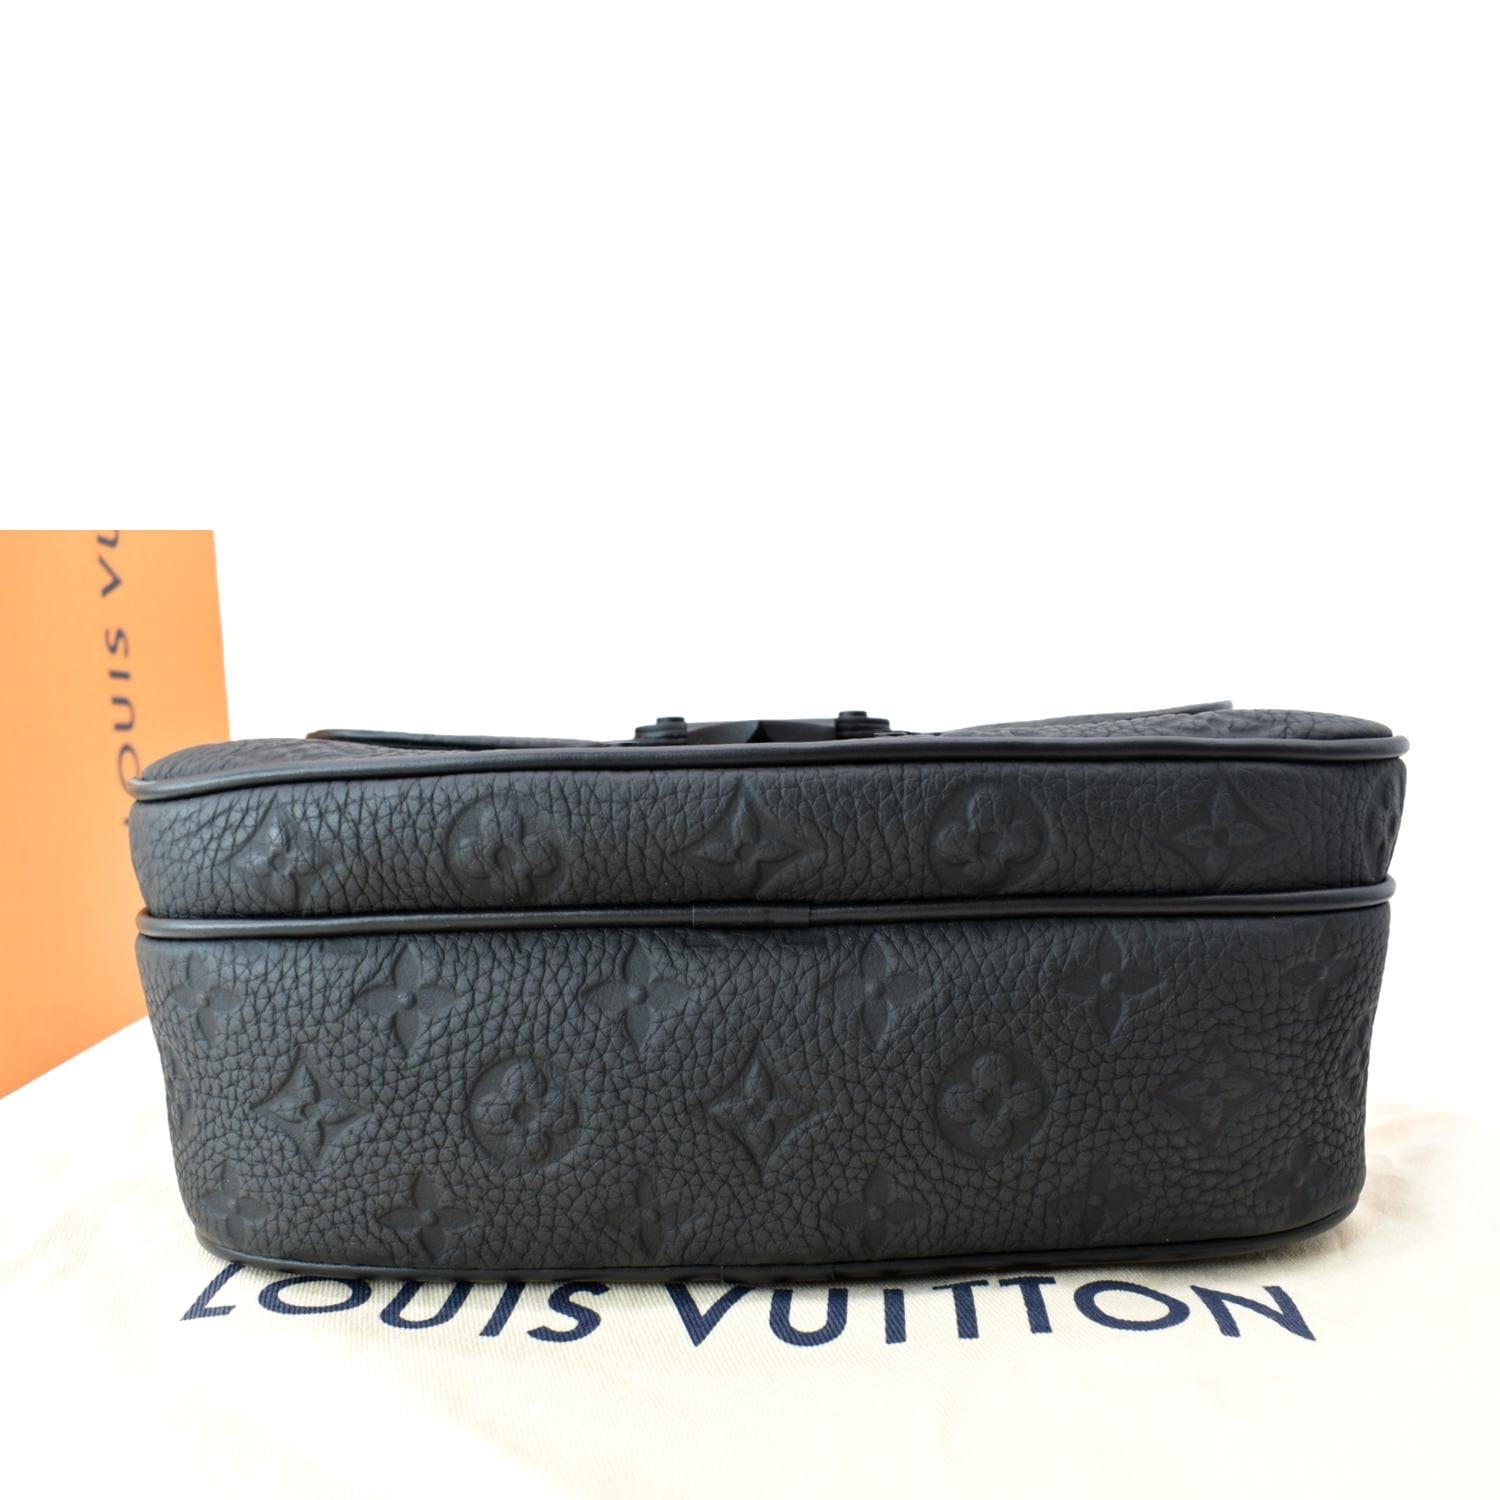 Cléry leather crossbody bag Louis Vuitton Black in Leather - 36112320